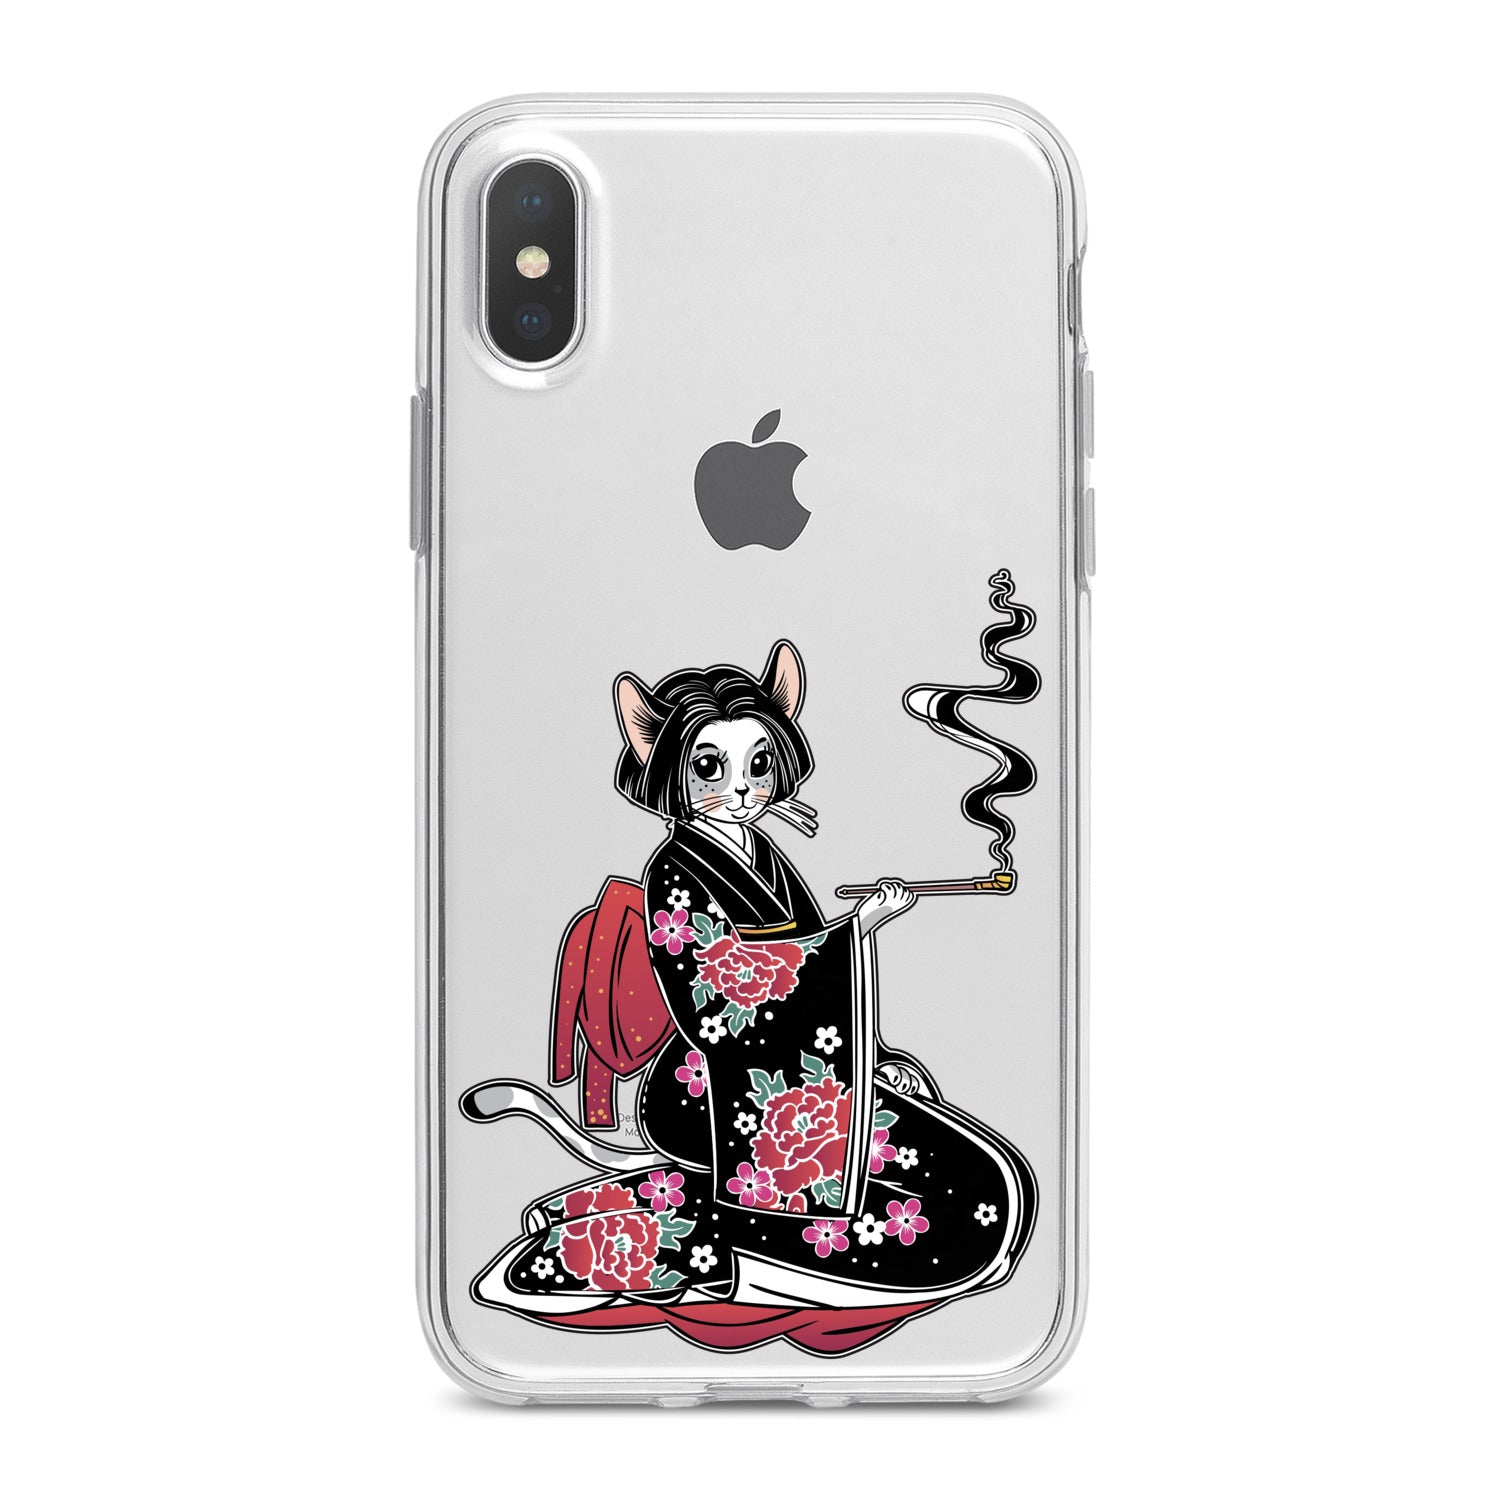 Lex Altern Japan Kitty Girl Phone Case for your iPhone & Android phone.